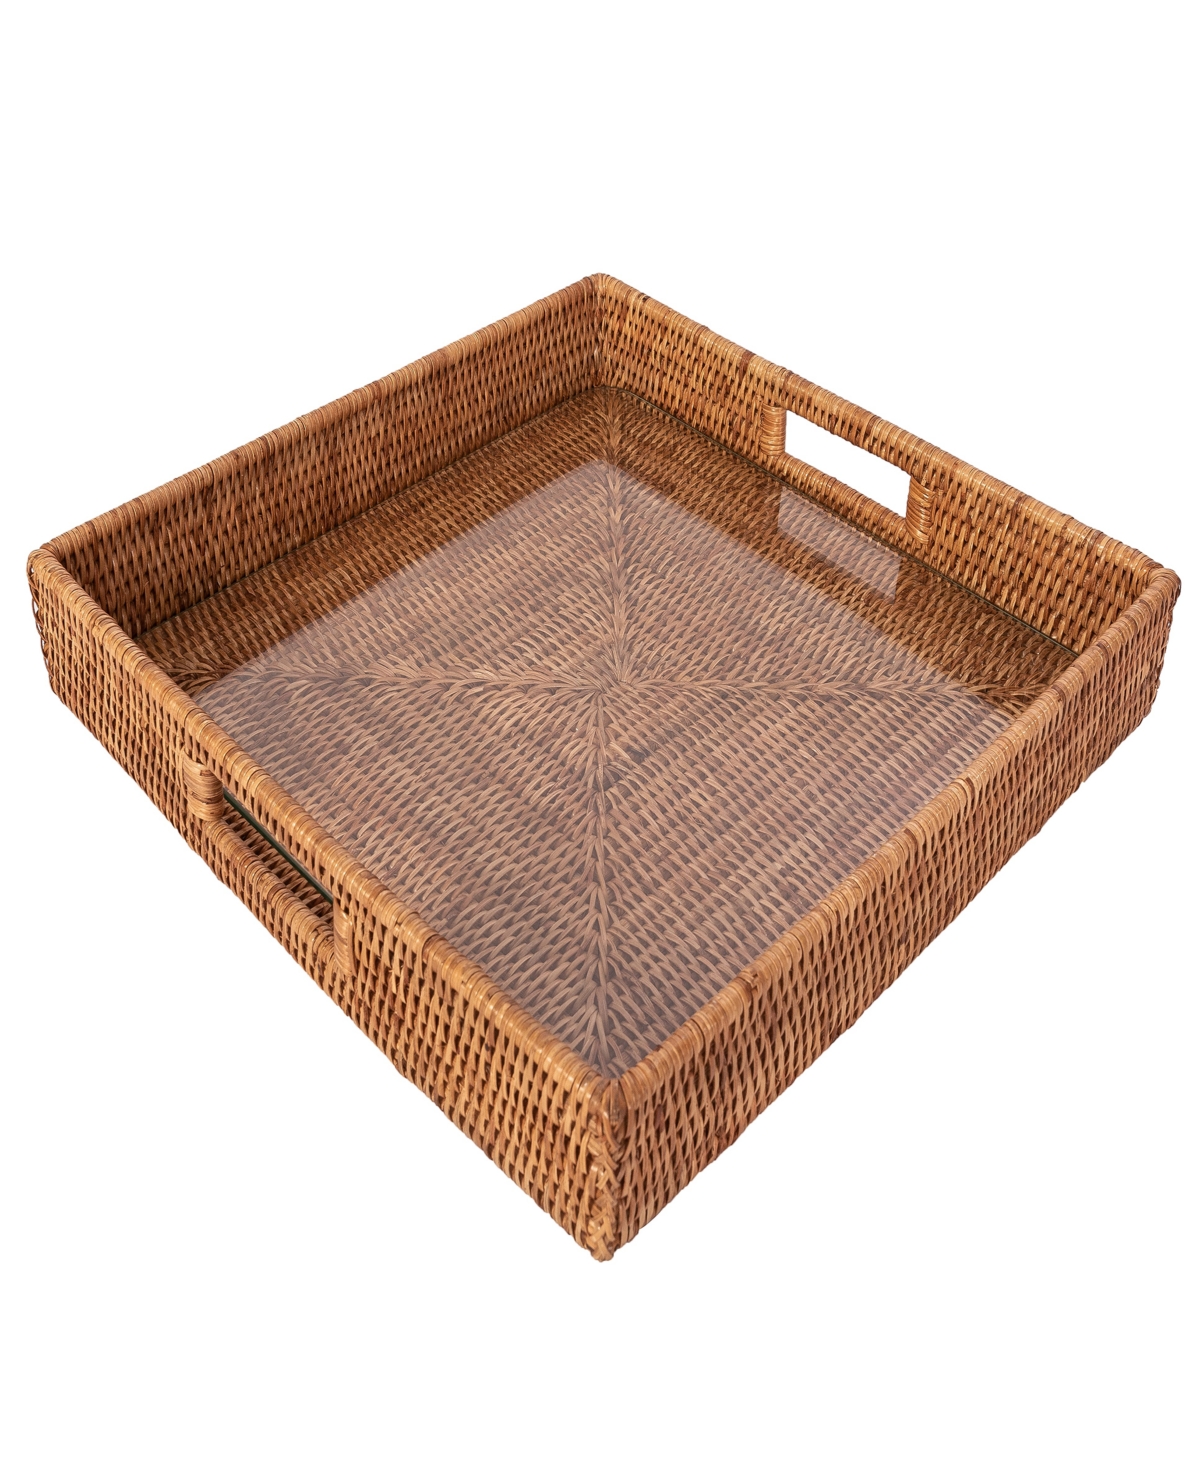 Artifacts Trading Company Artifacts Rattan Square Serving Ottoman Tray With Glass Insert In Honey Brown